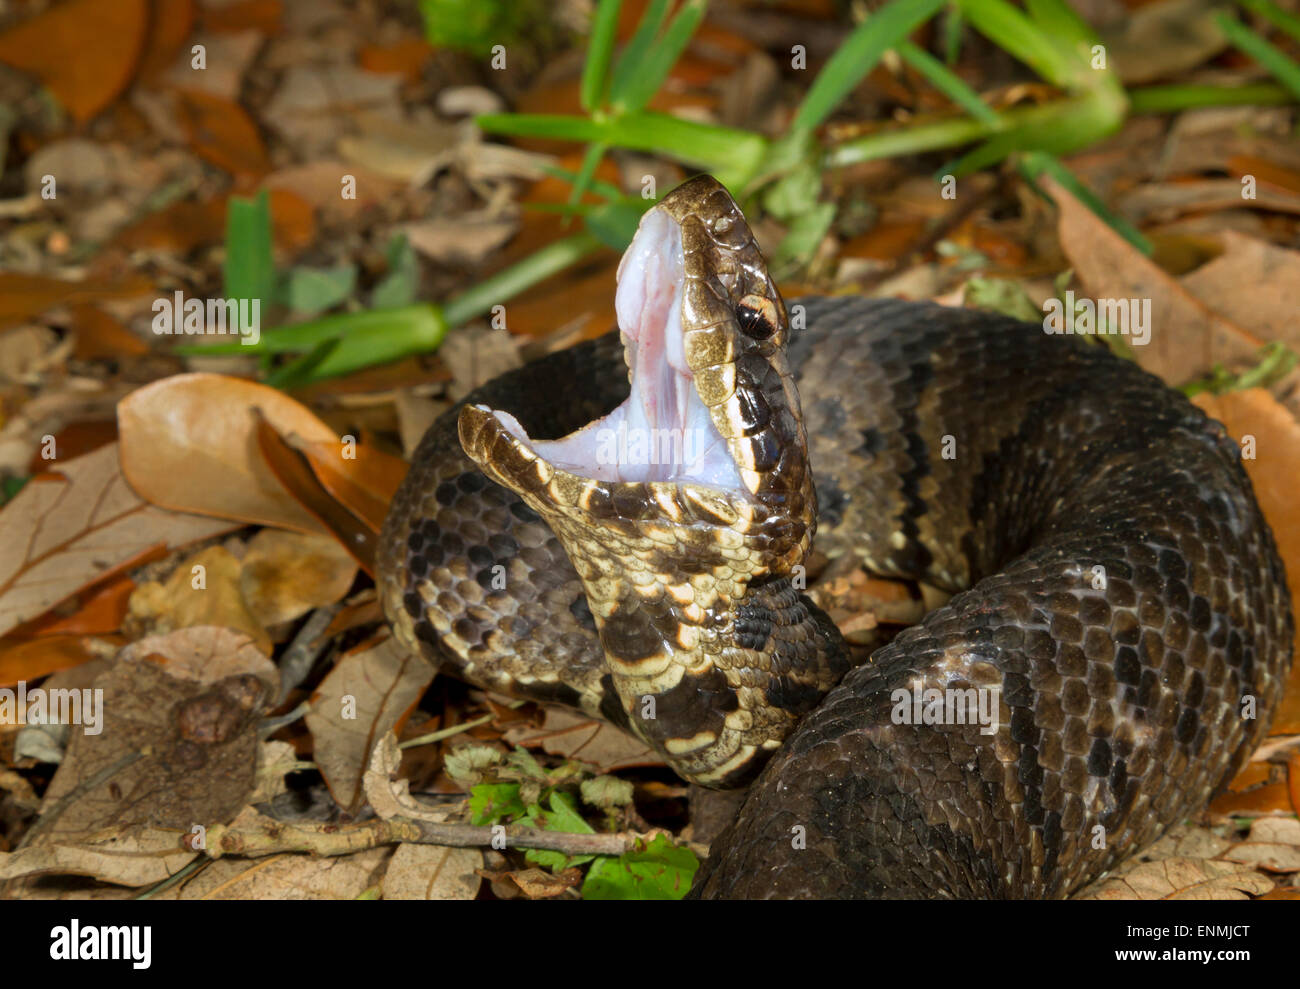 Cottonmouth or Water Moccasin (Agkistrodon piscivorus) displaying the white mouth in an attempt to threat an intruder. Stock Photo